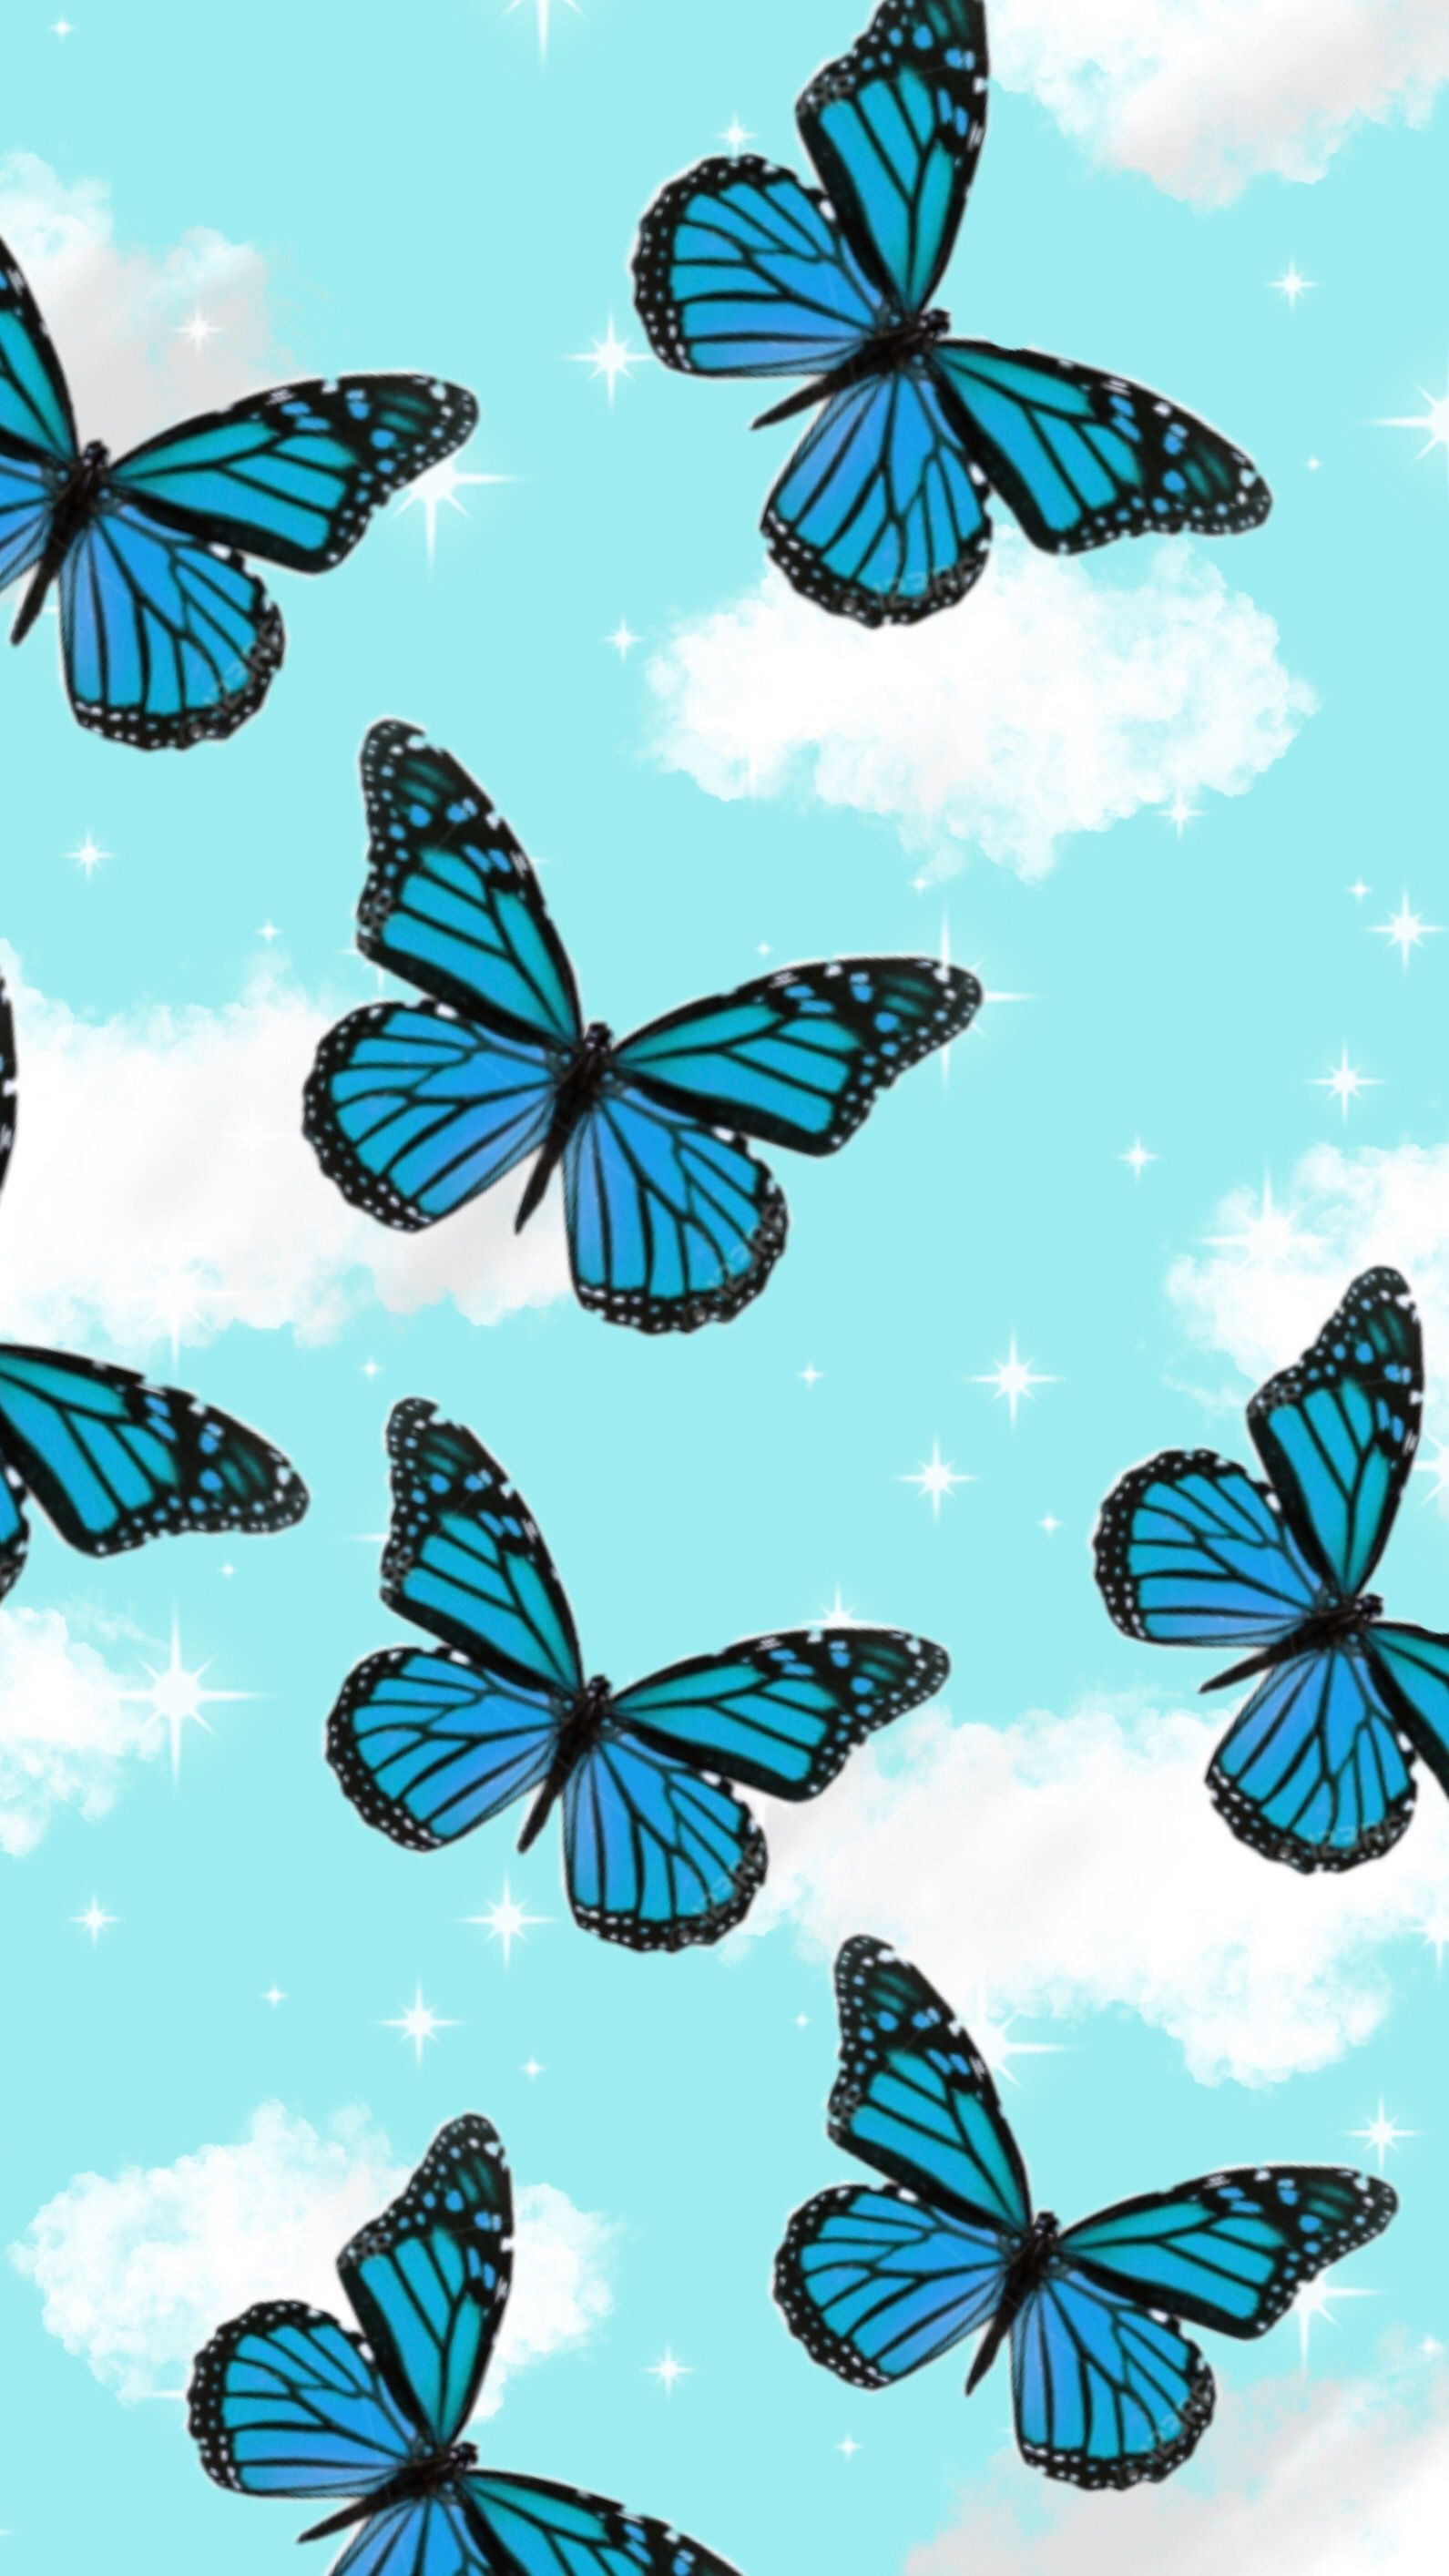 Free download Blue Butterfly Wallpapers Aesthetic.